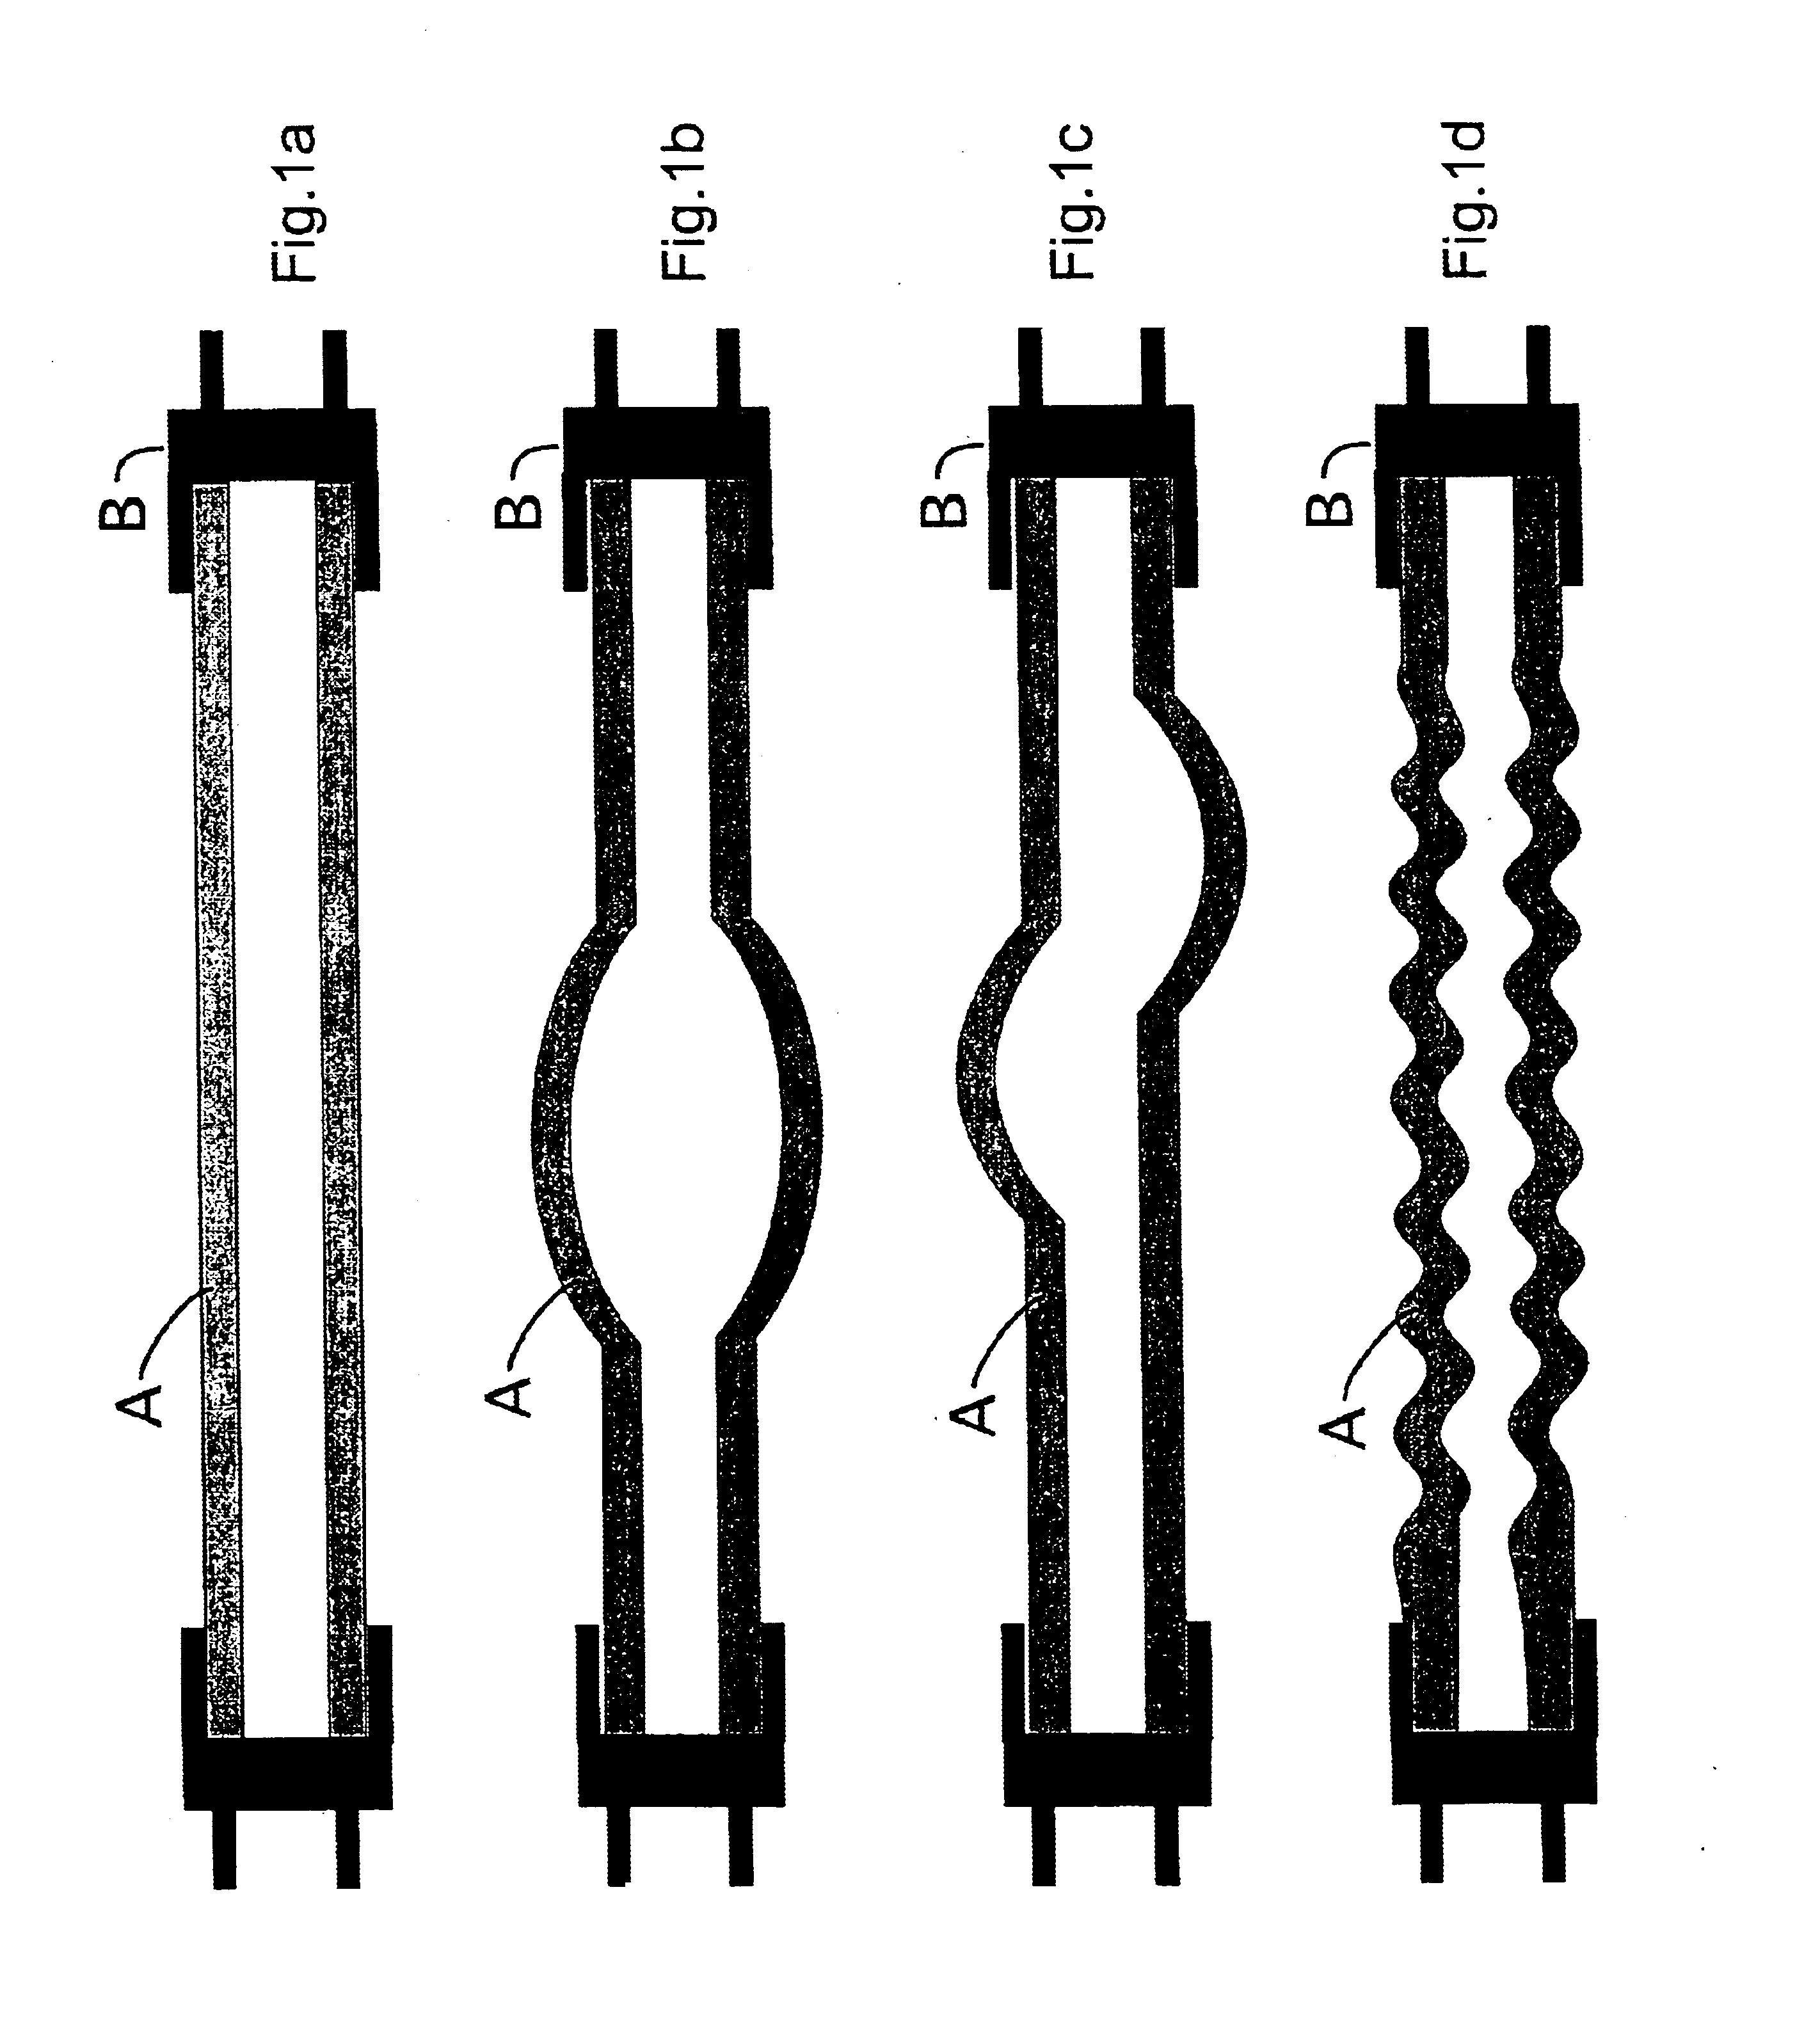 Method of producing structures using centrifugal forces